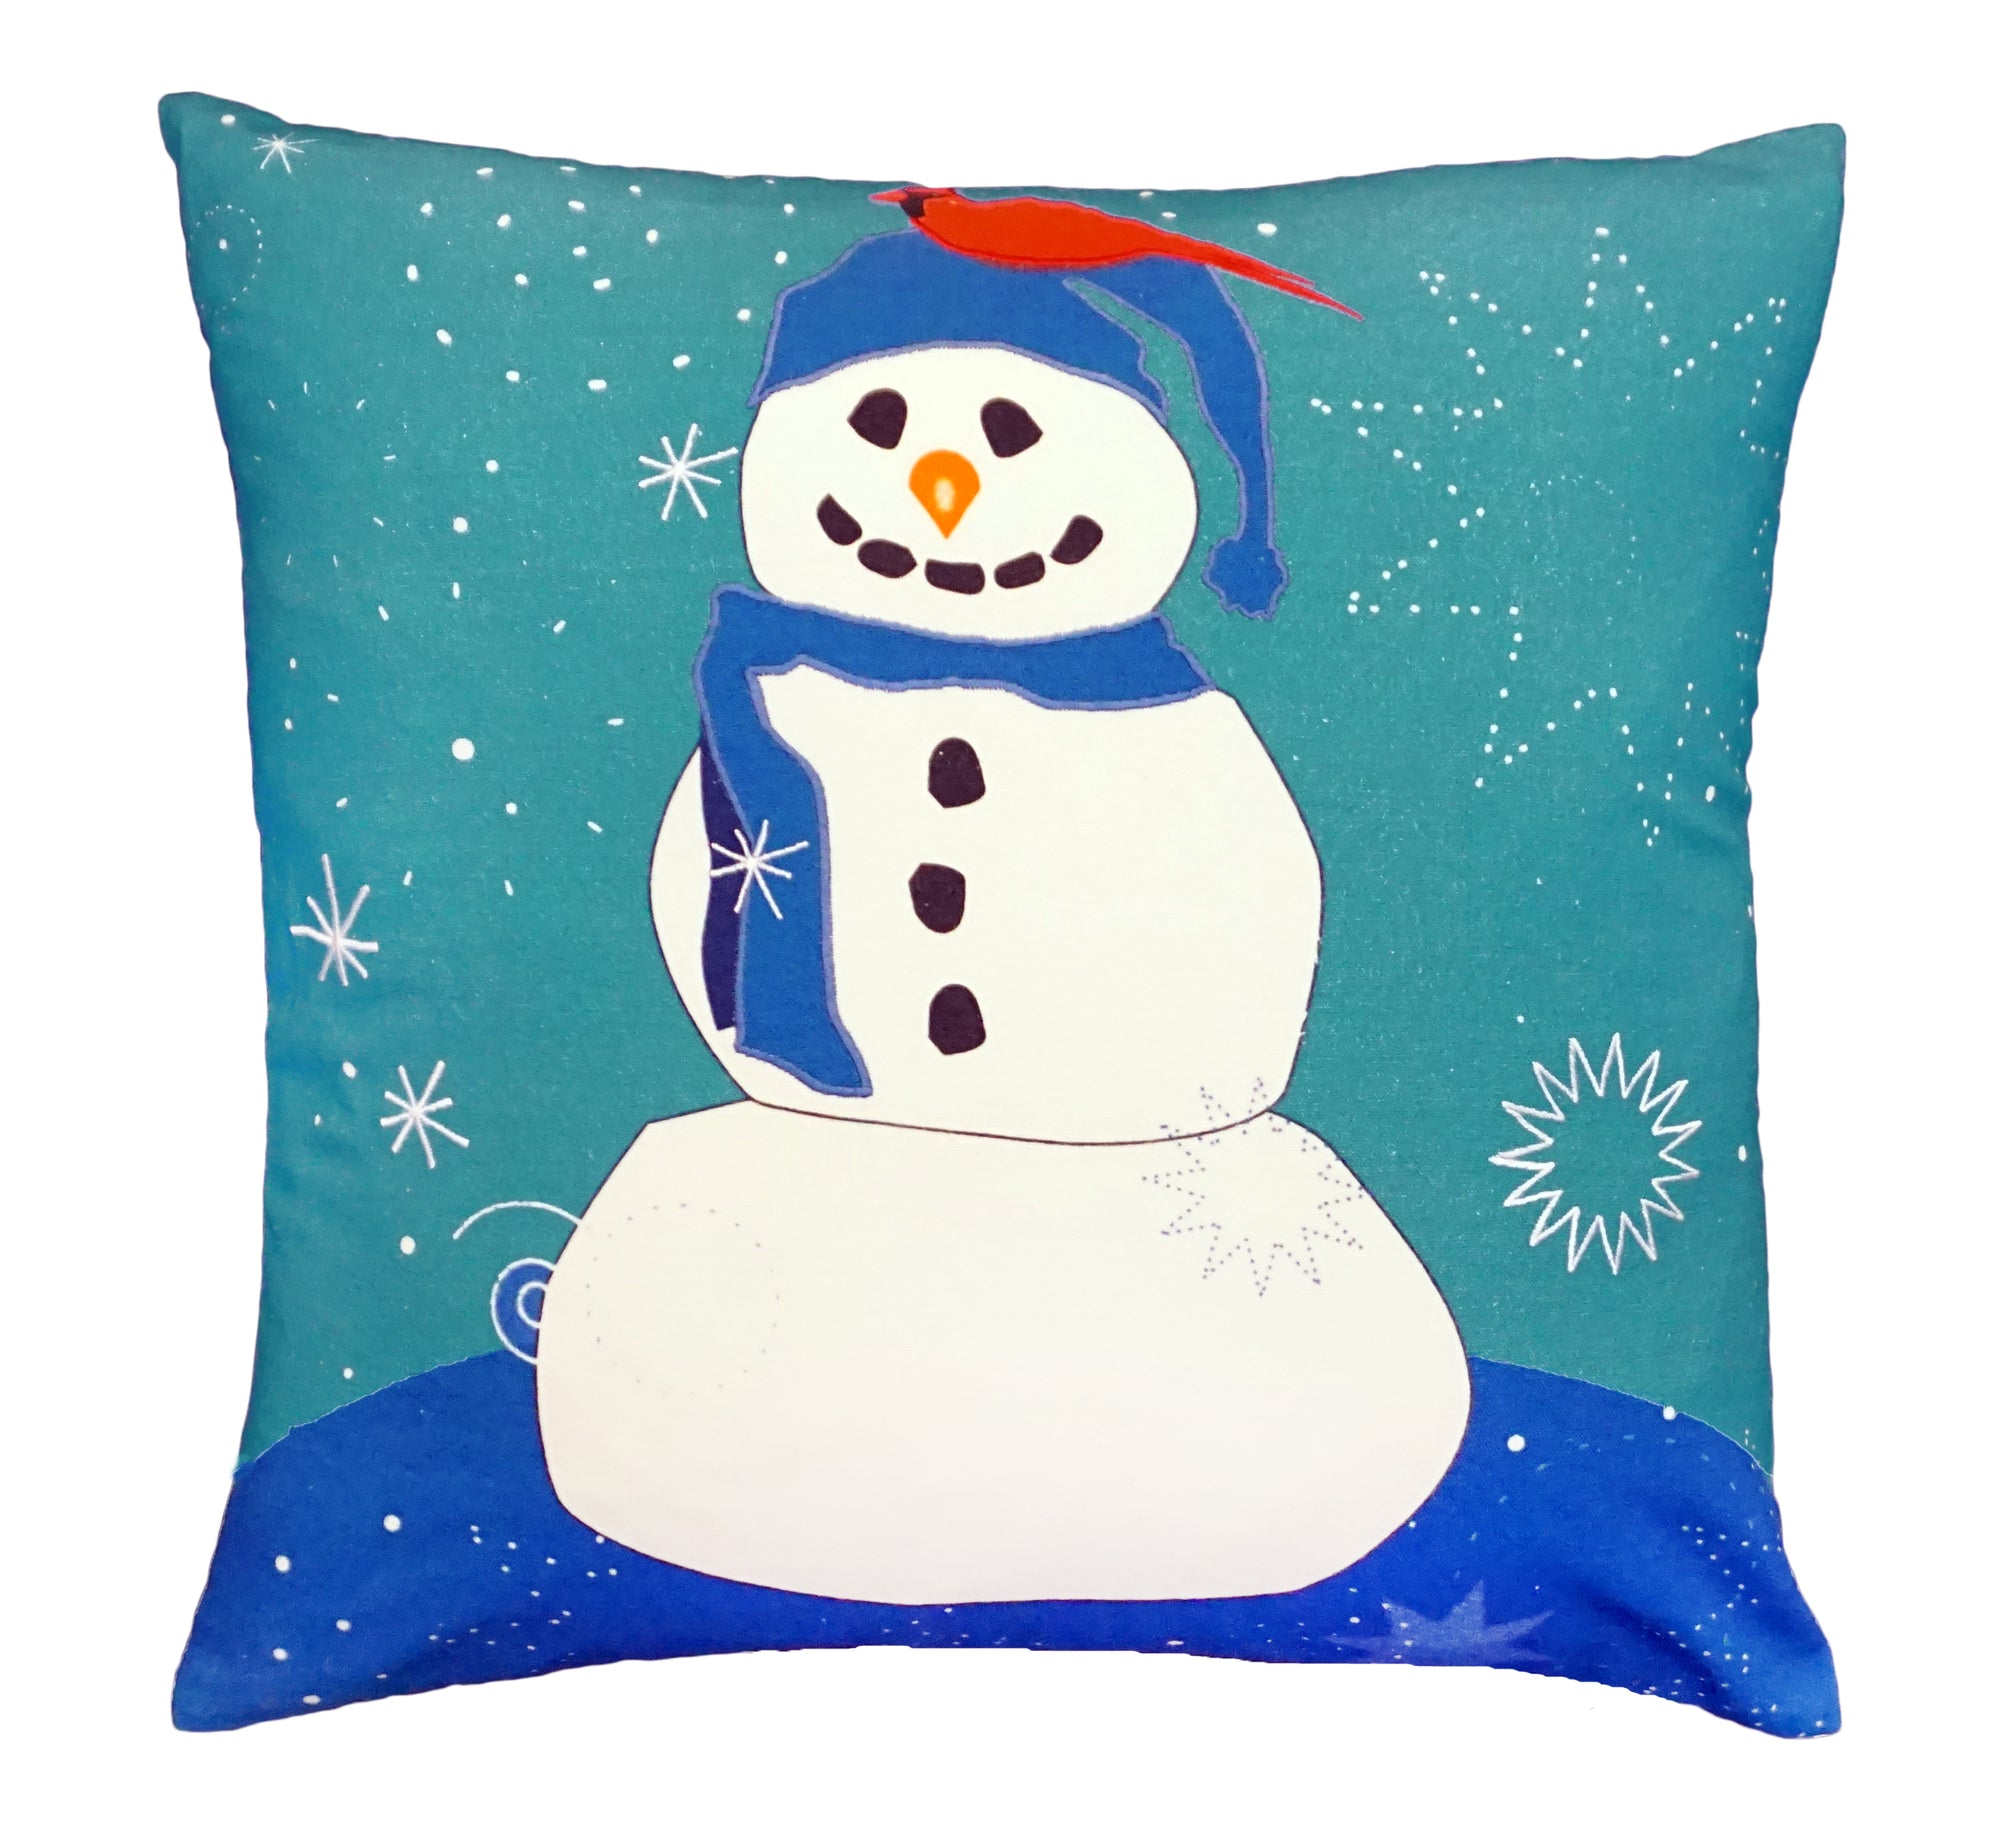 NPE033 Snowman and Red Bird Decorative Pillow